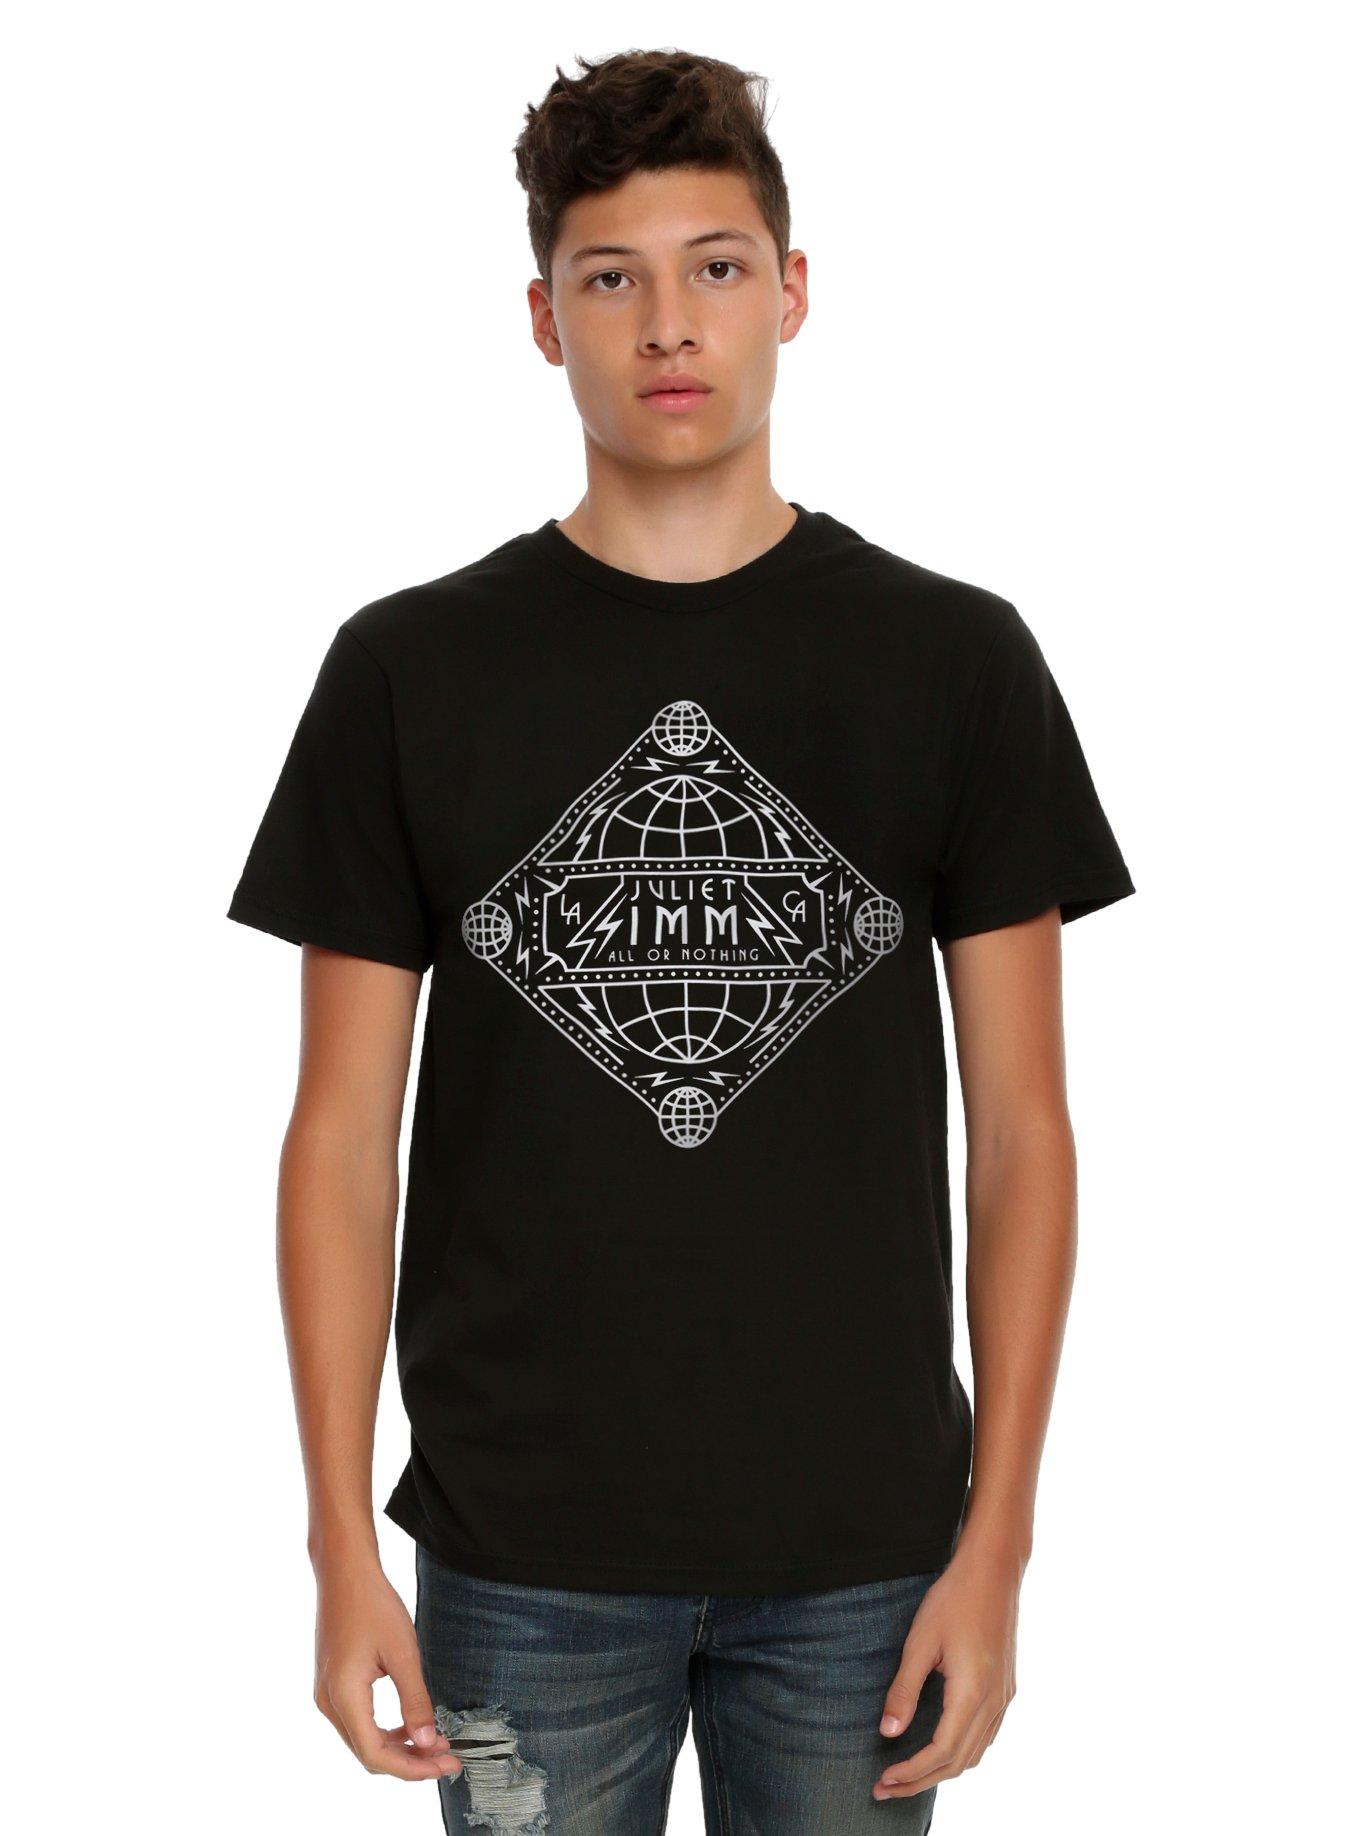 Juliet Simms All Or Nothing T-Shirt, BLACK, hi-res